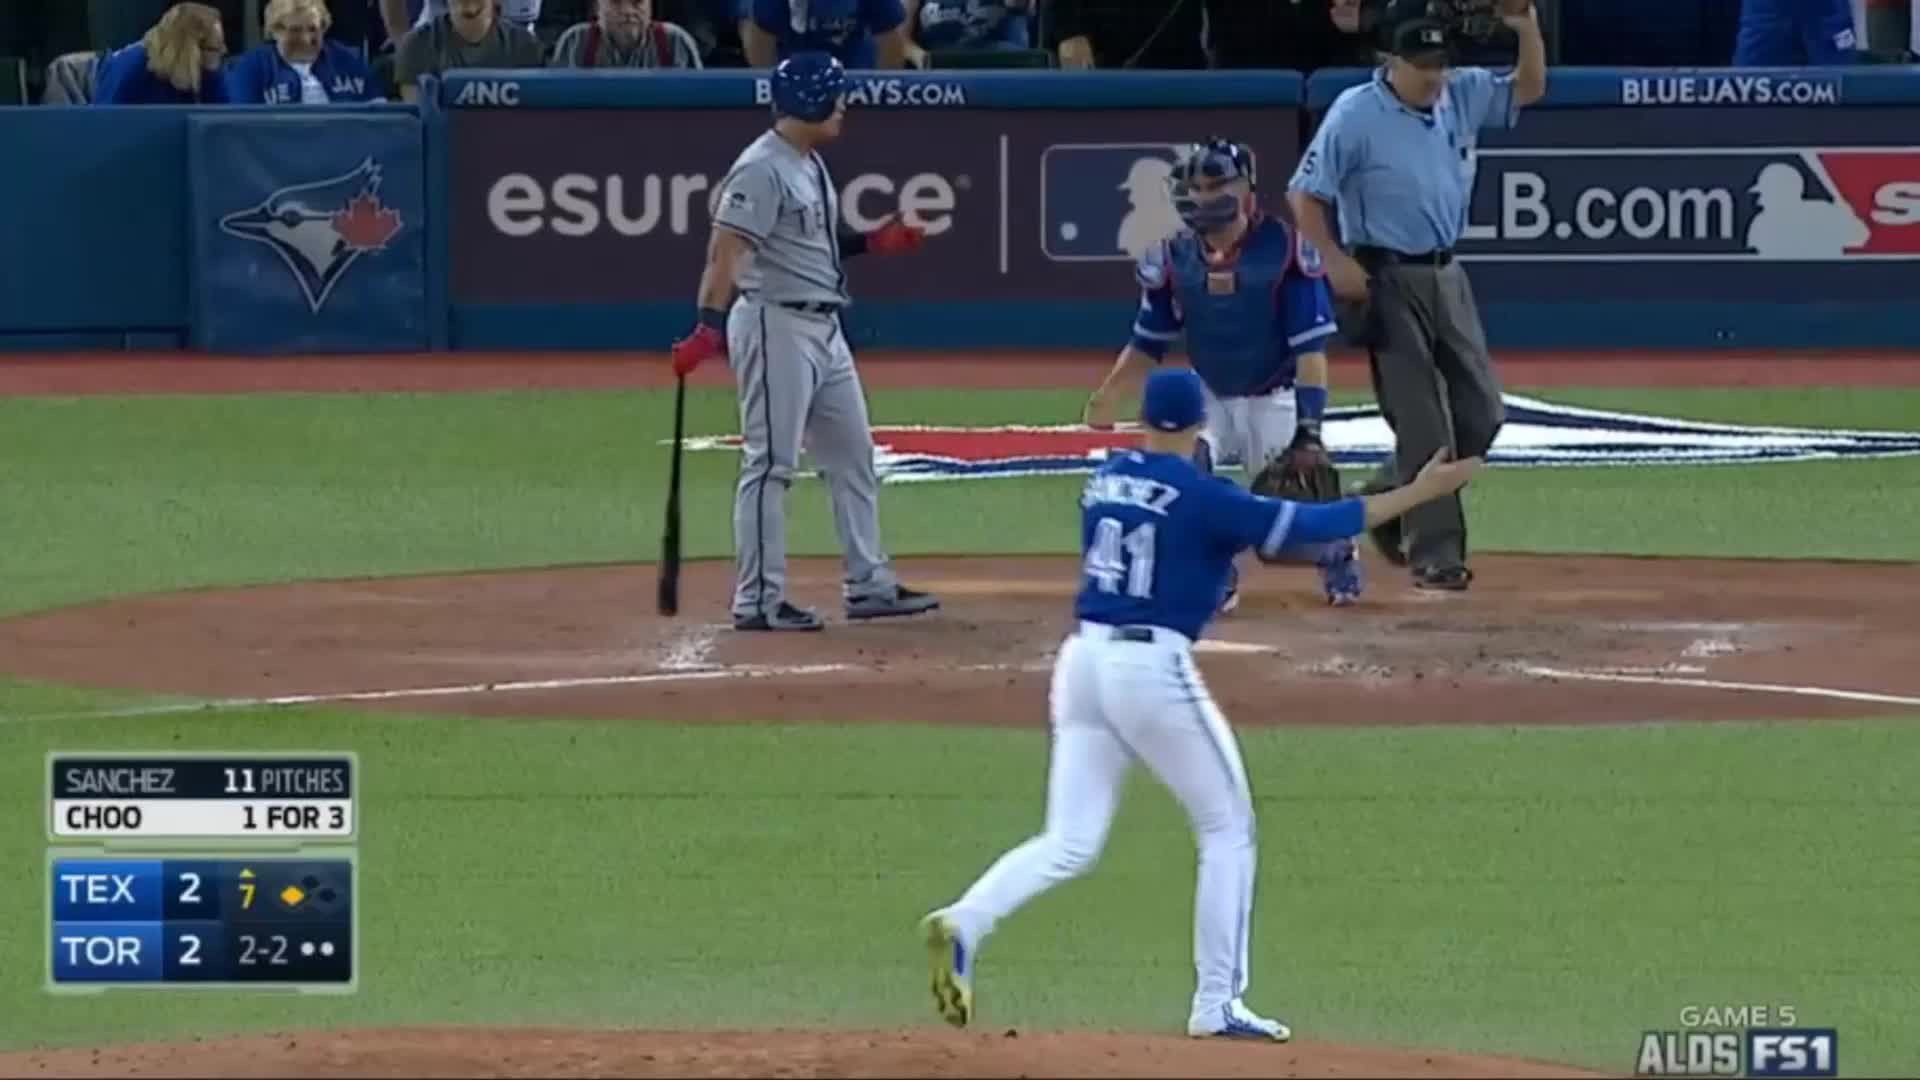 1920x1080 Every reason why Blue Jays-Rangers Game 5 was one of the best, weirdest  games ever - SBNation.com